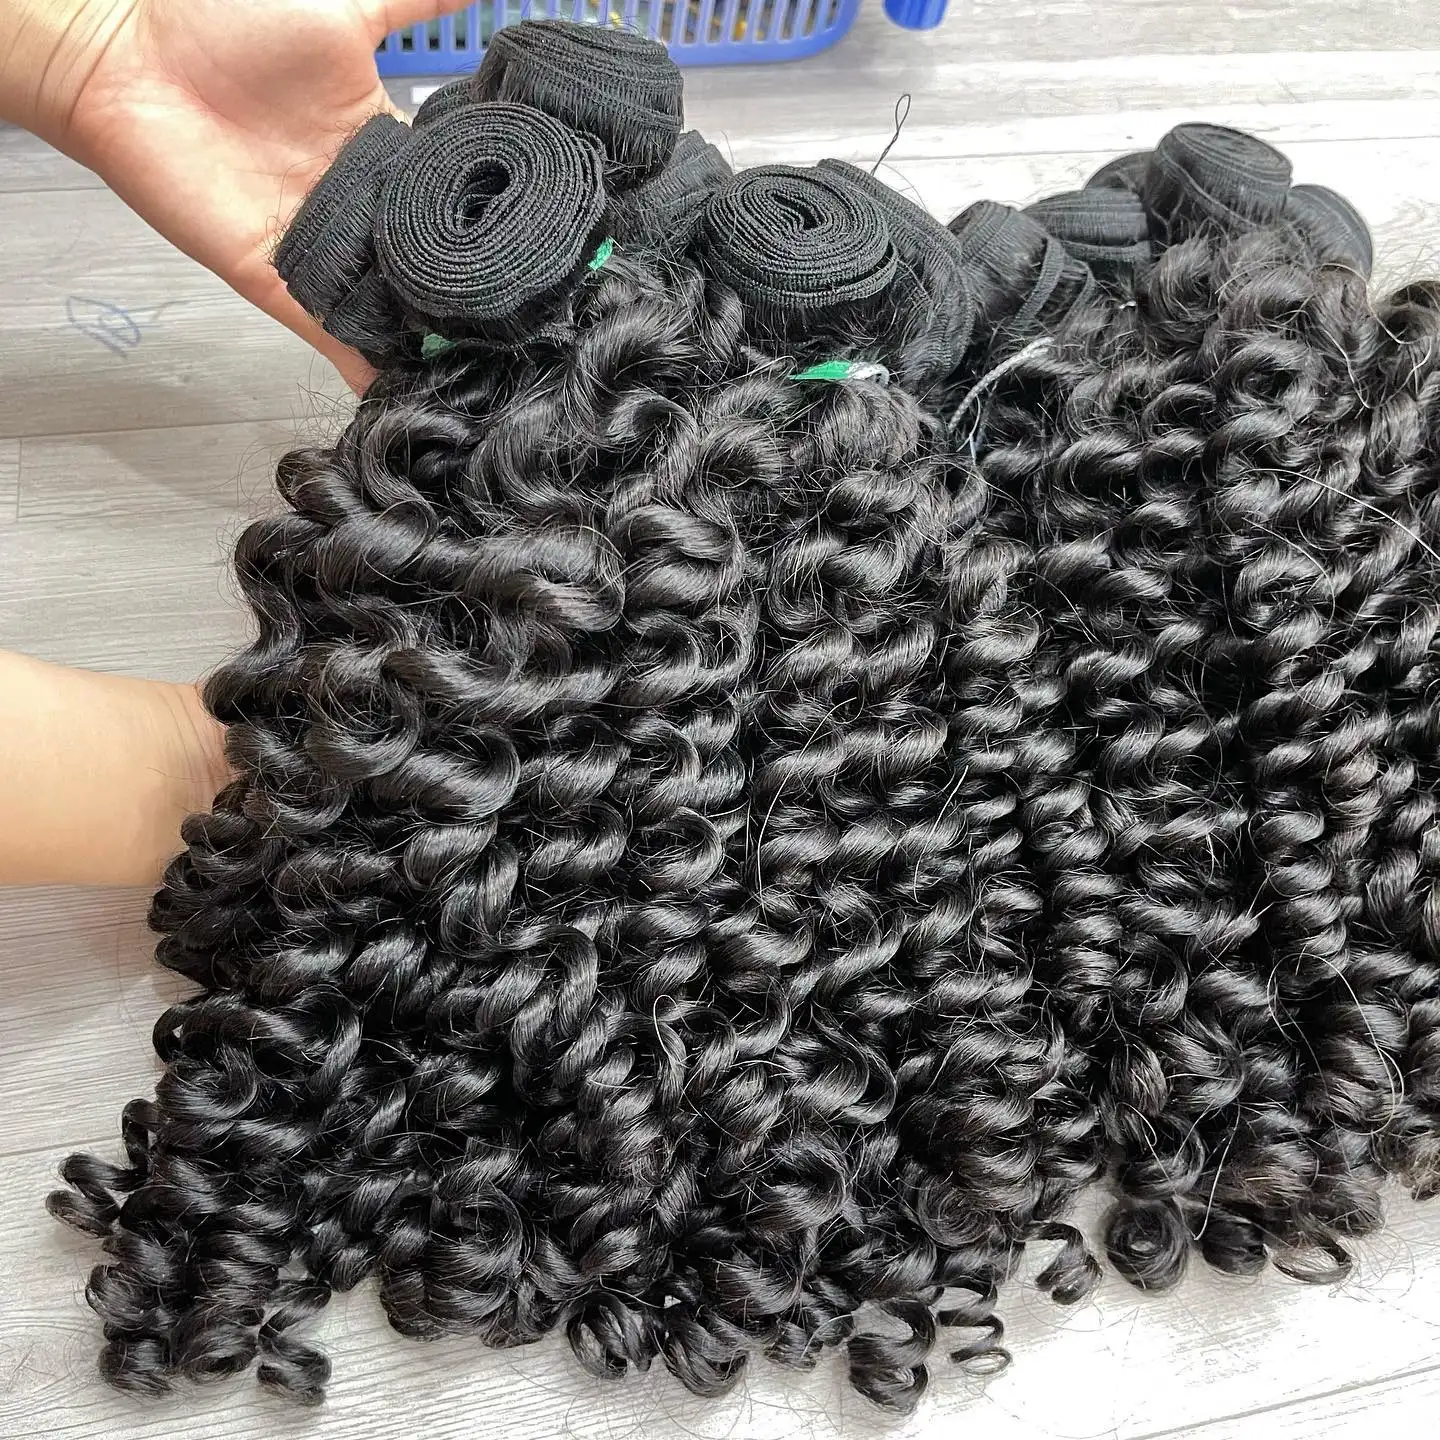 Wholesale Vietnamese Human Hair Extensions Raw Curly Hair Full Length From Vietnam Factory